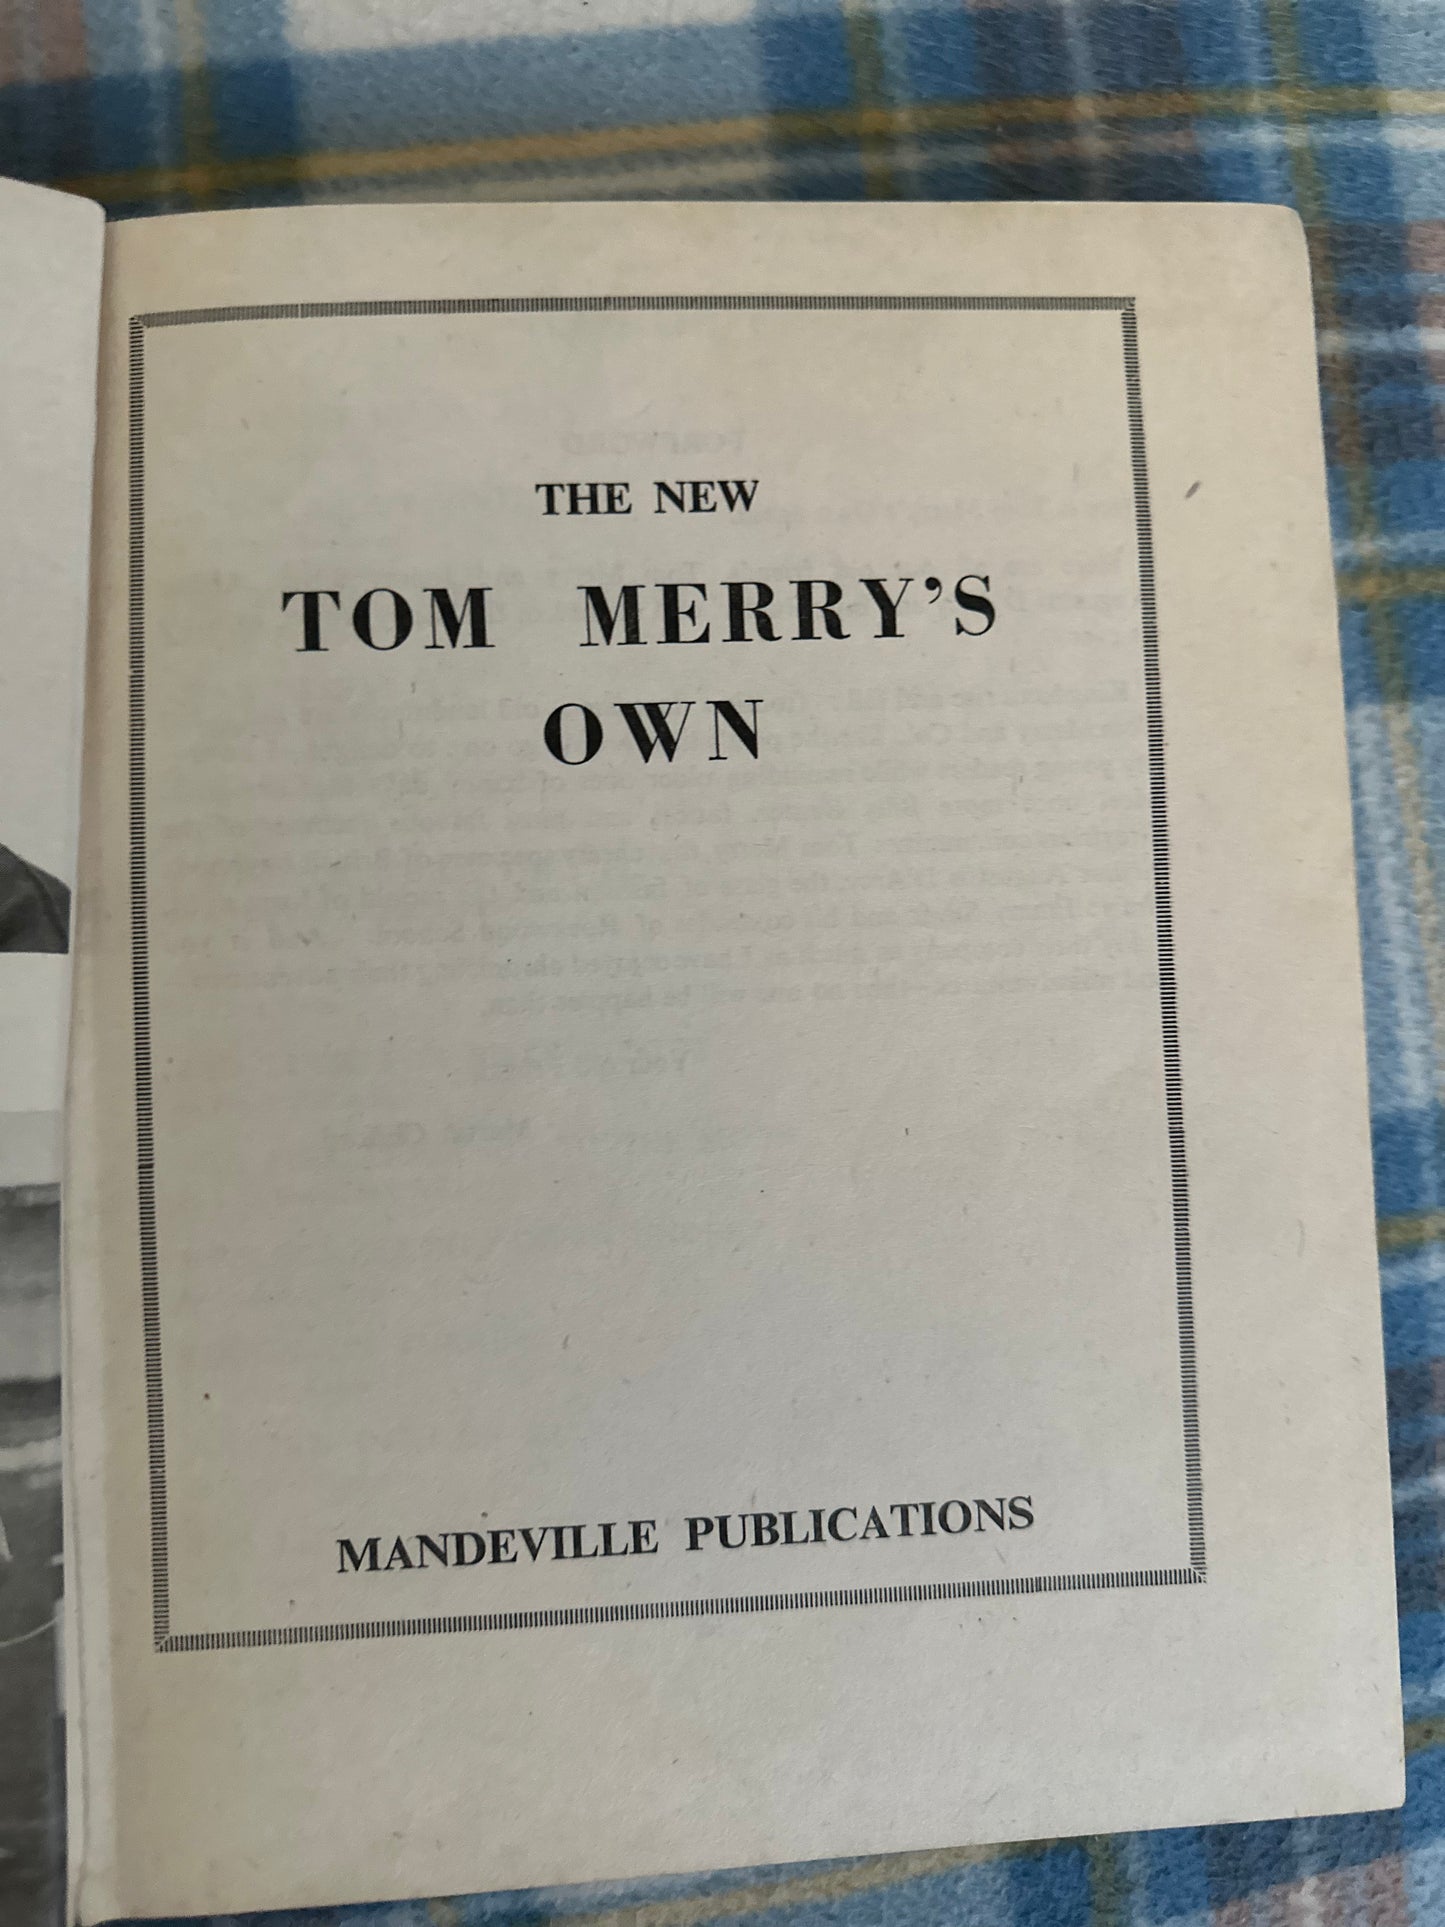 1951 Tom Merry’s Own(Mandeville Publications)